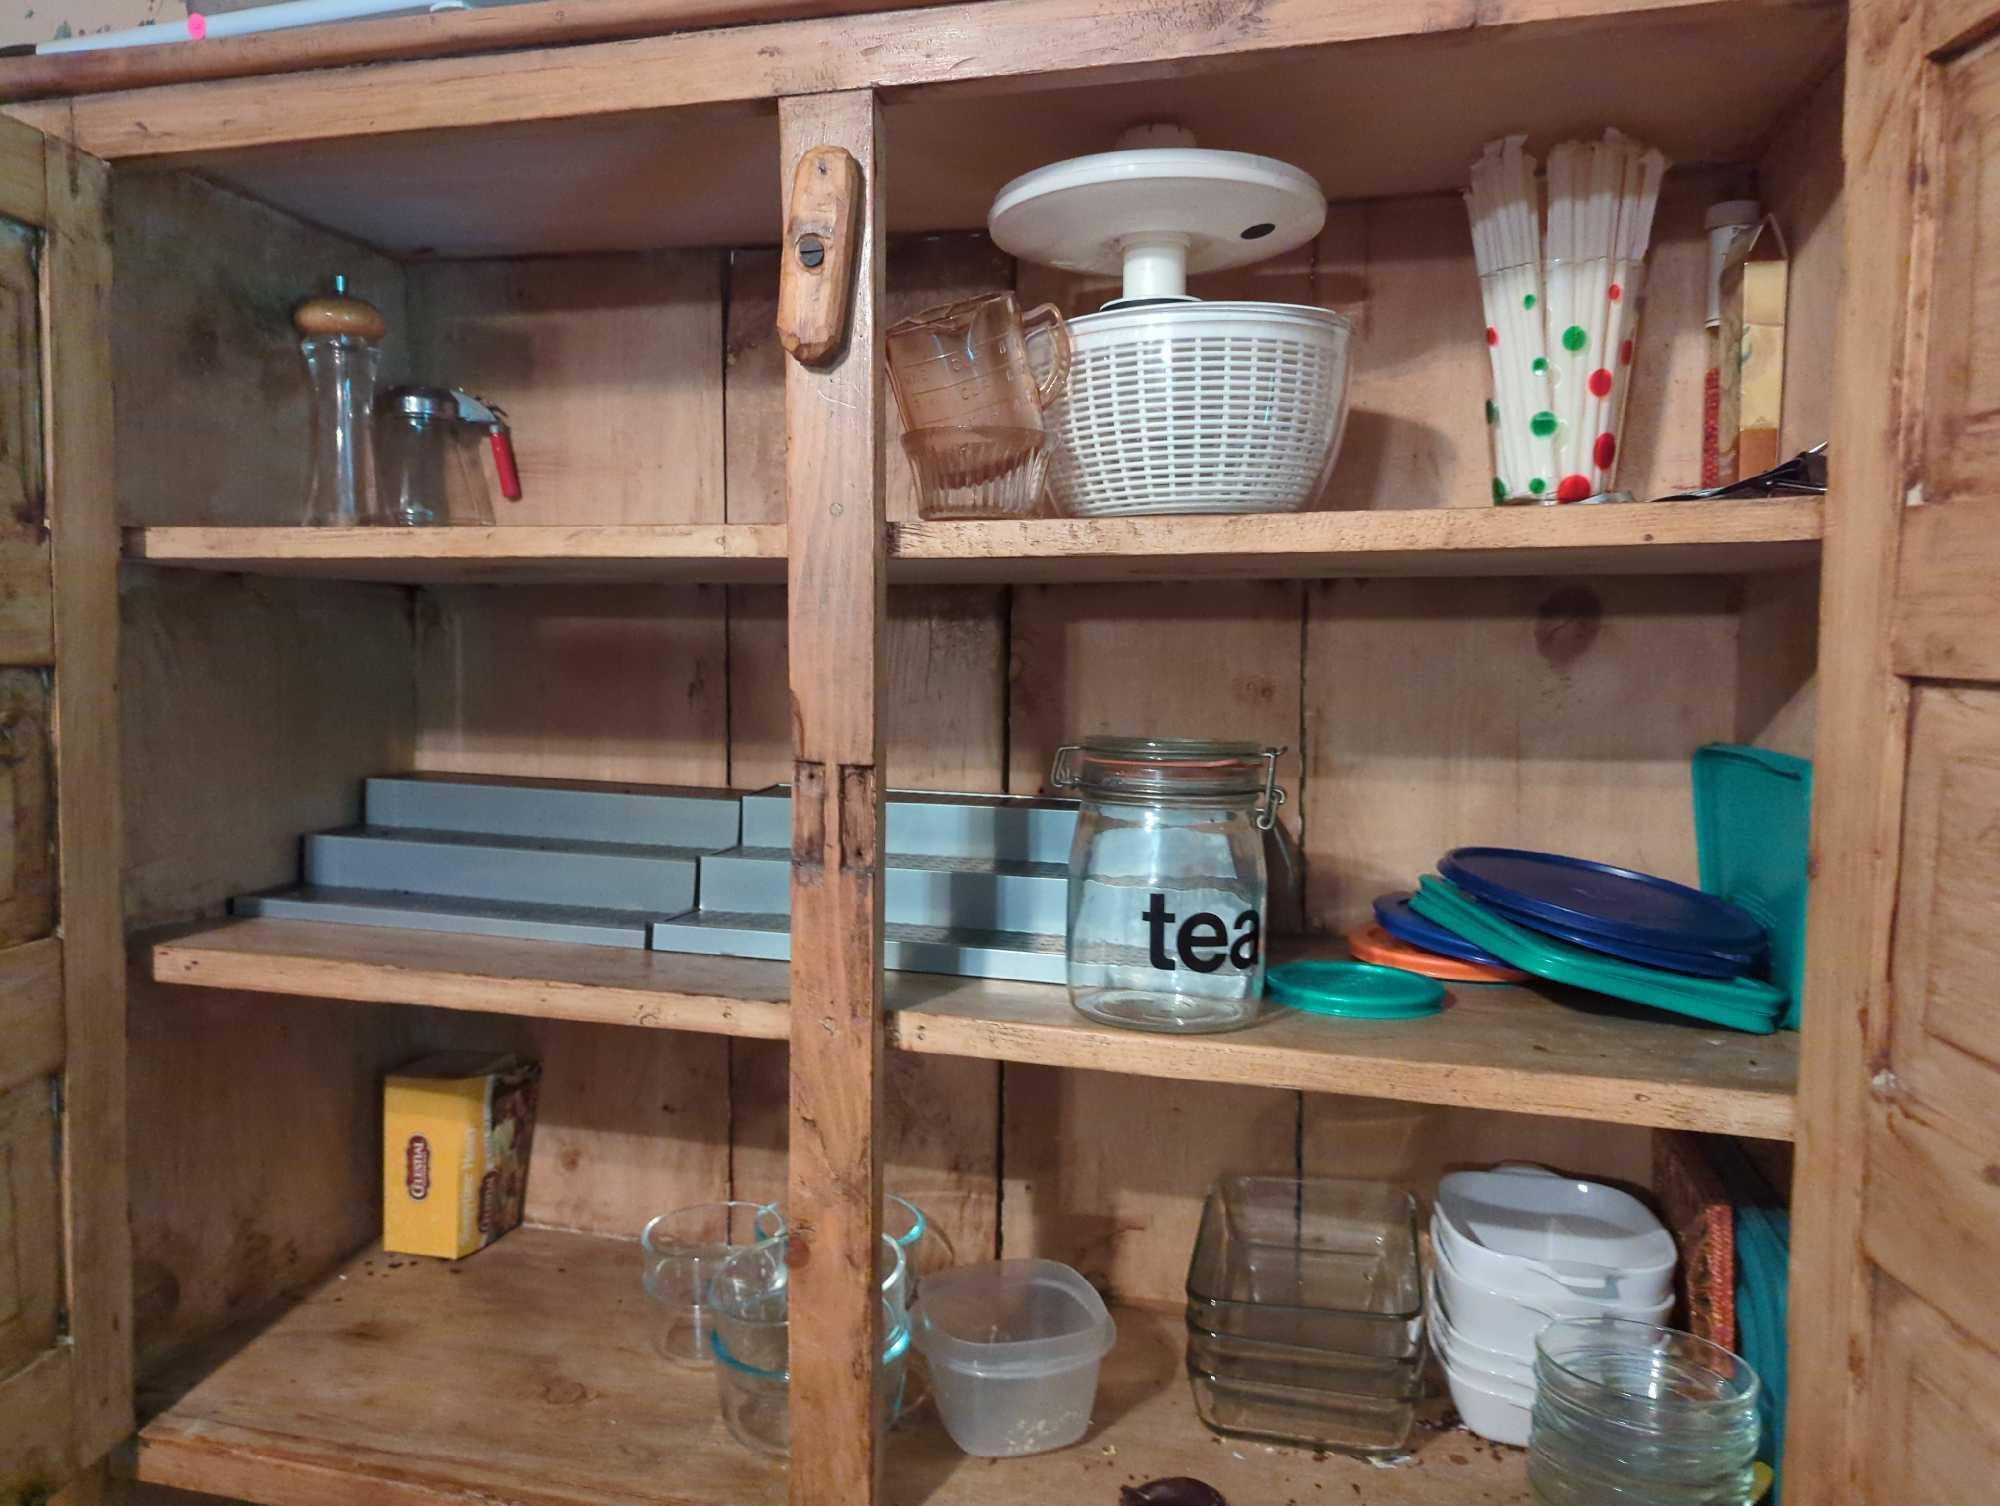 (DR) HOOSIER CABINET, WHITE OAK, DIMENSIONS - 74" H X 42" W X 22" D, ITEMS ON SHELVES NOT INCLUDED,